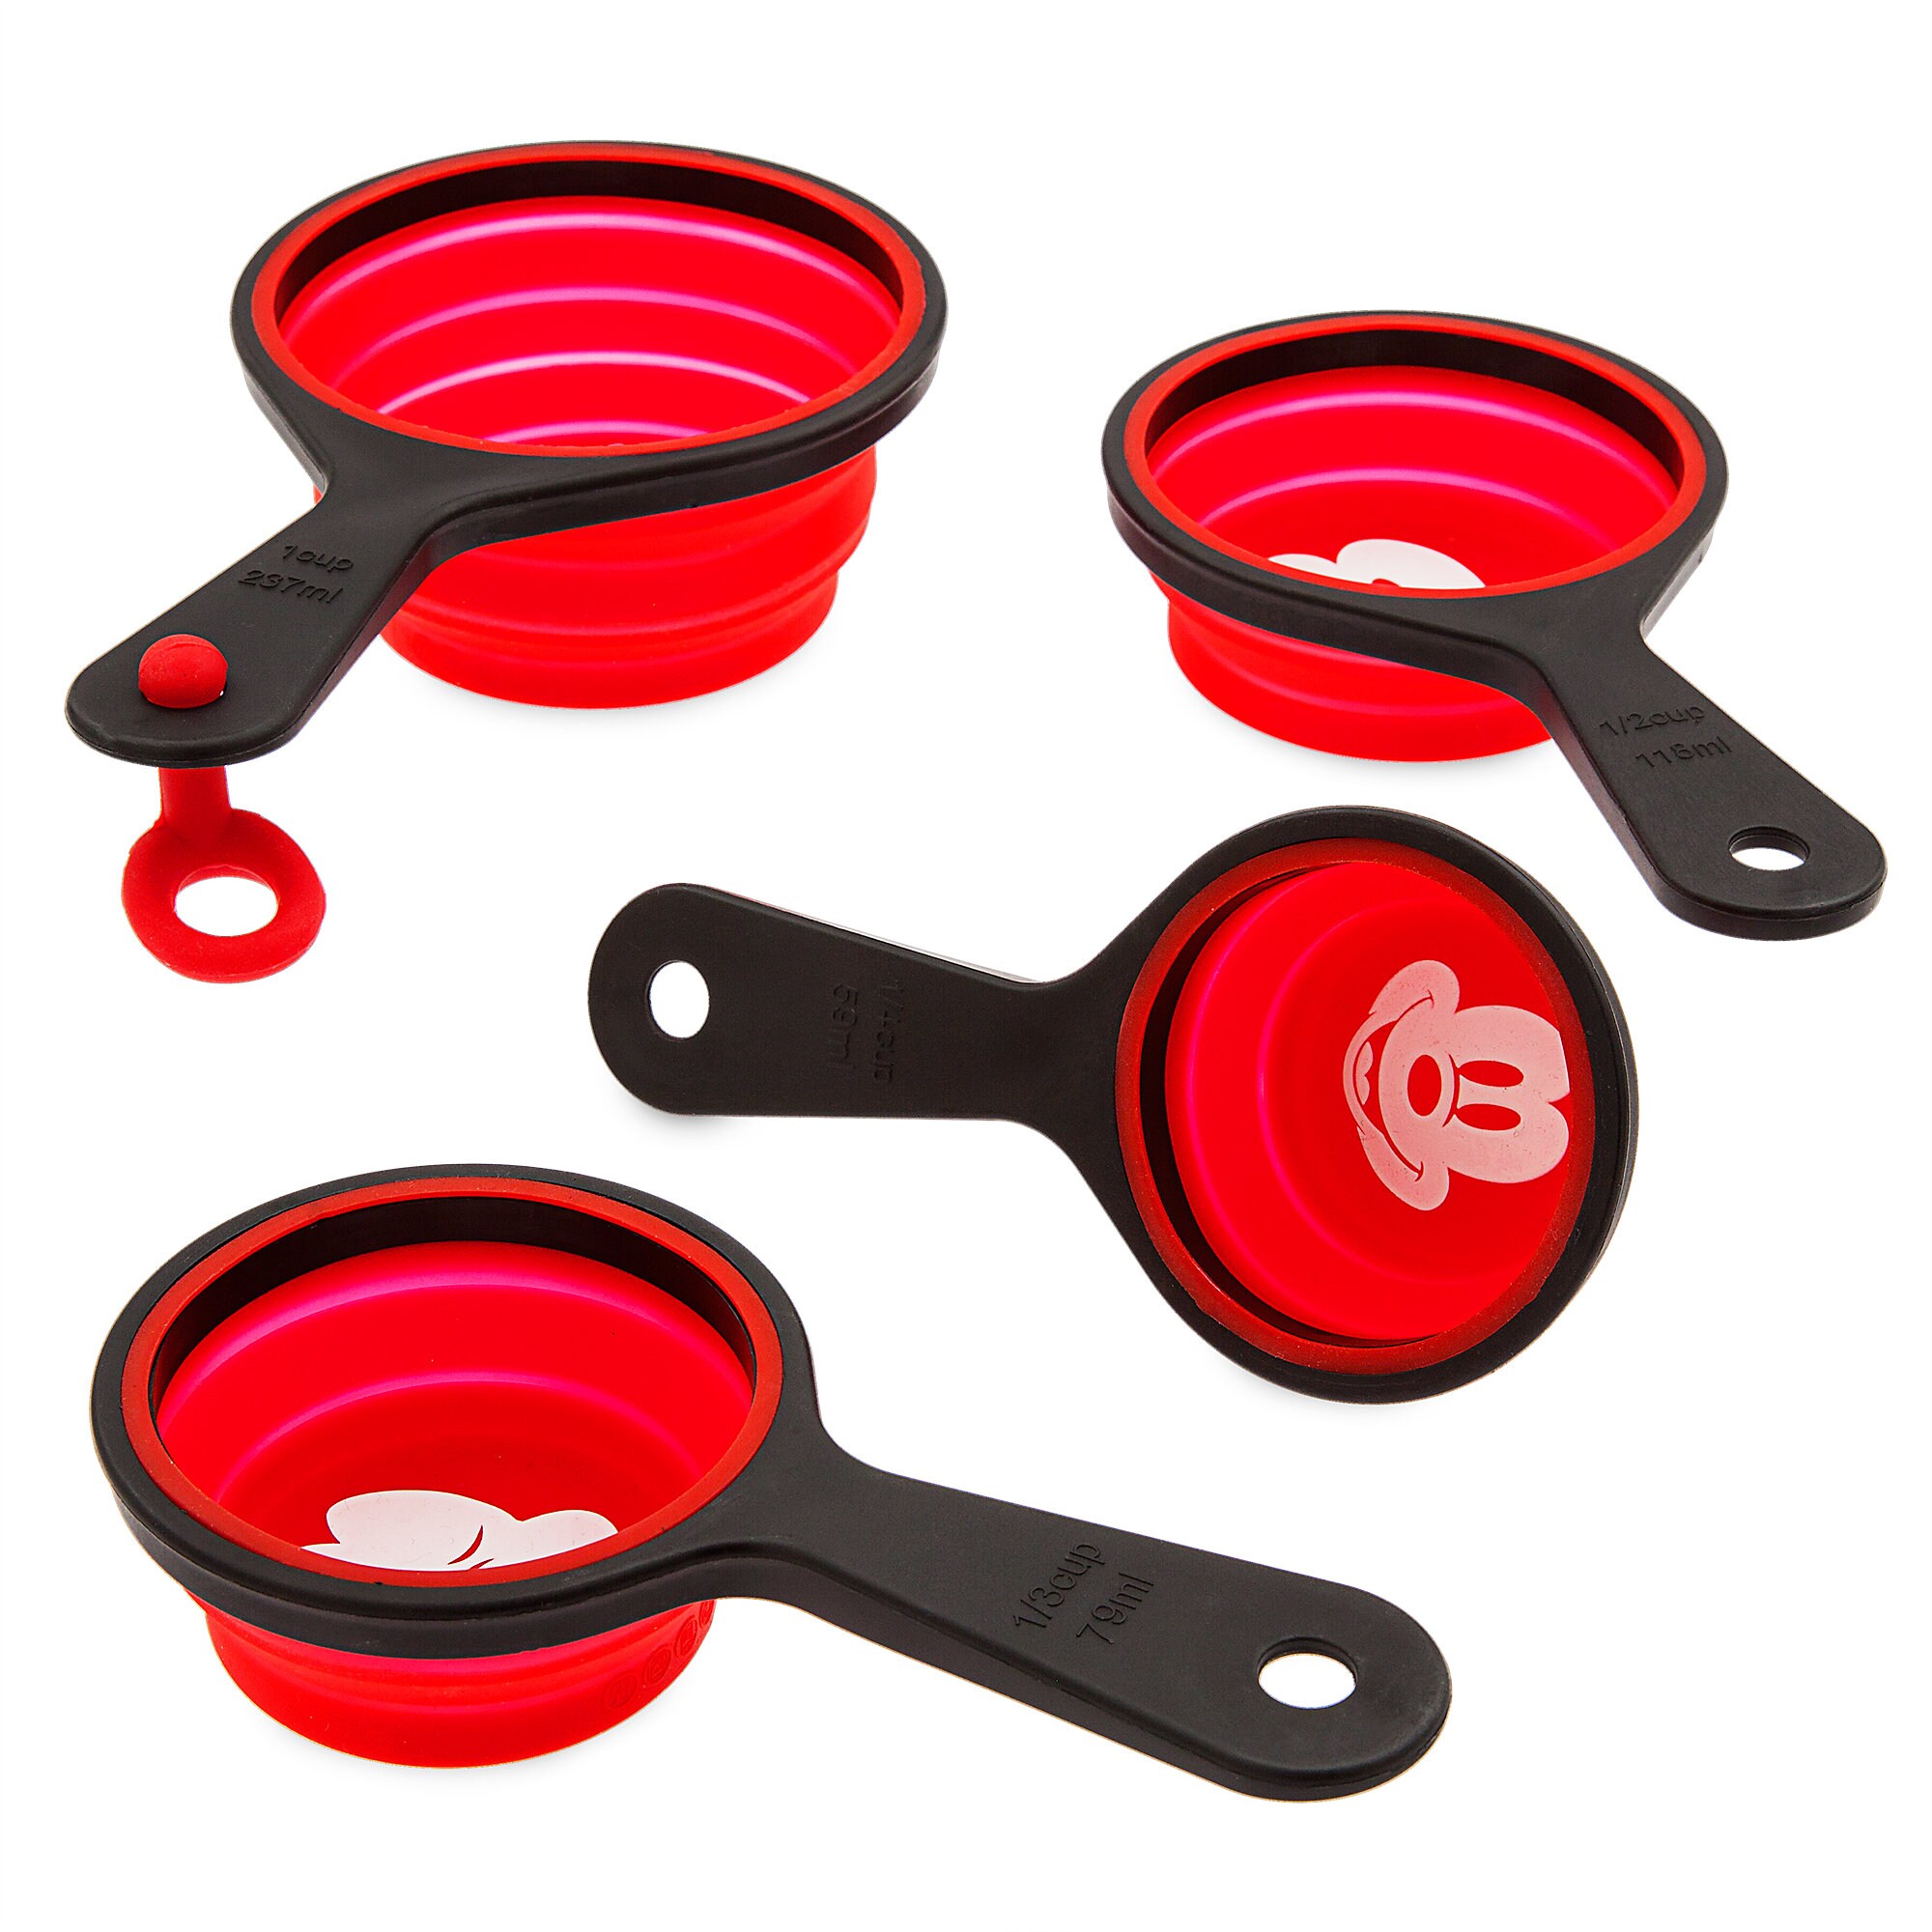 Mickey Mouse Measuring Cup Set - Disney Eats